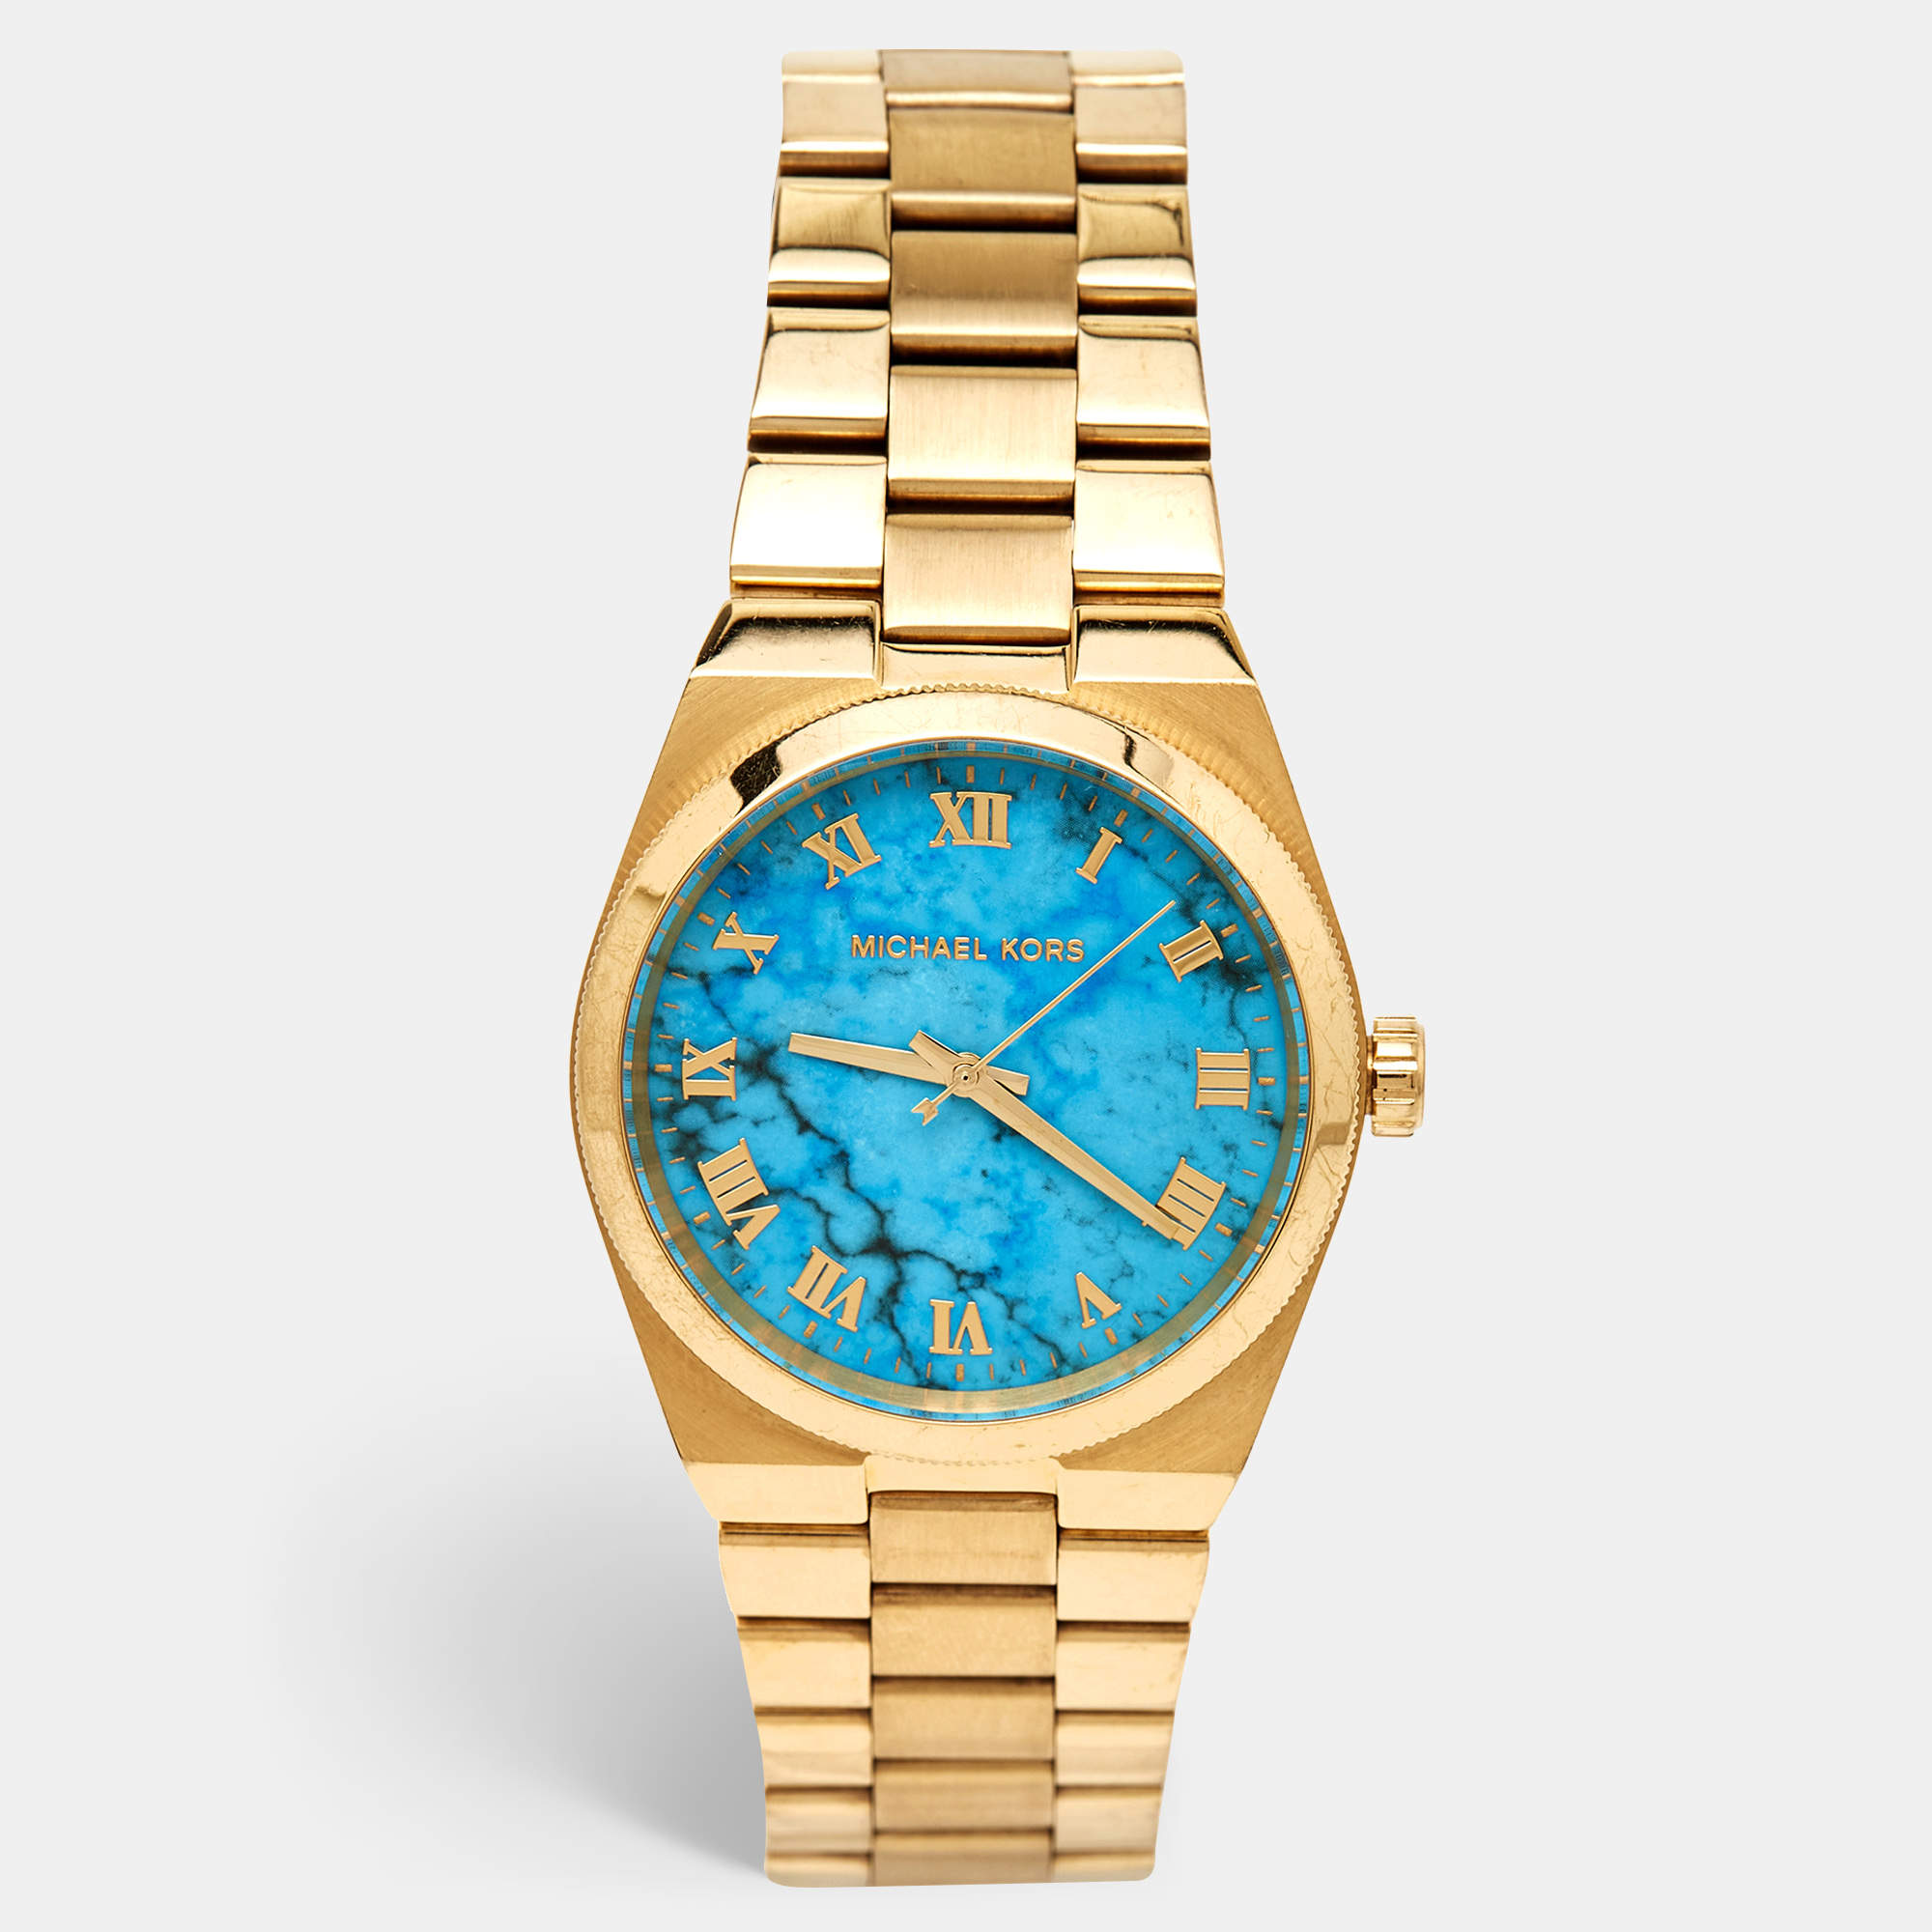 Michael Kors Fashion Wrist Watch in Surulere  Watches Prestigious  Collectibles Stores  Jijing